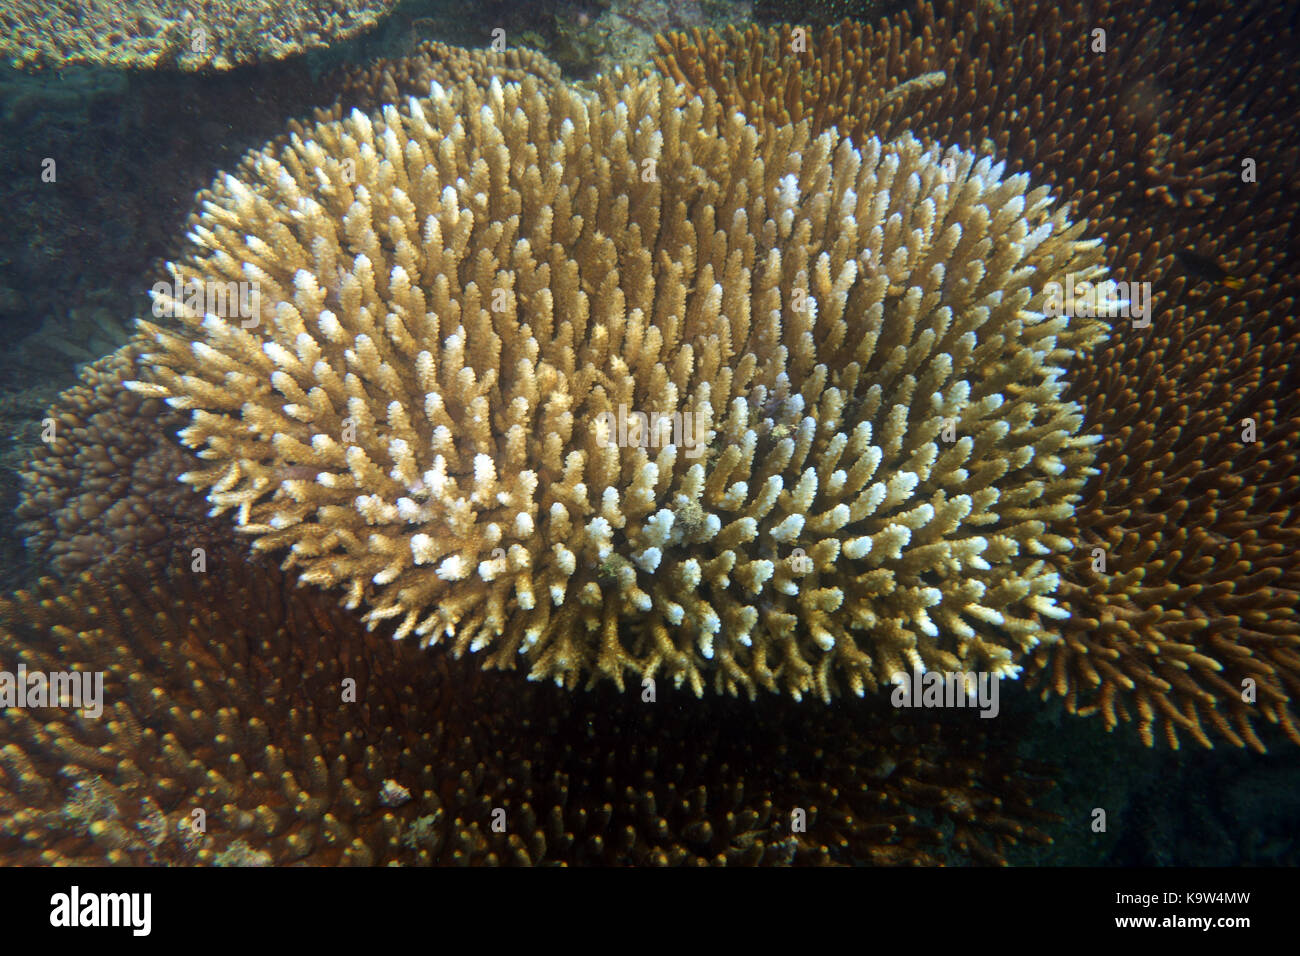 Acropora coral in the process of slowly recovering from bleaching, Great Barrier Reef, Queensland, Australia Stock Photo